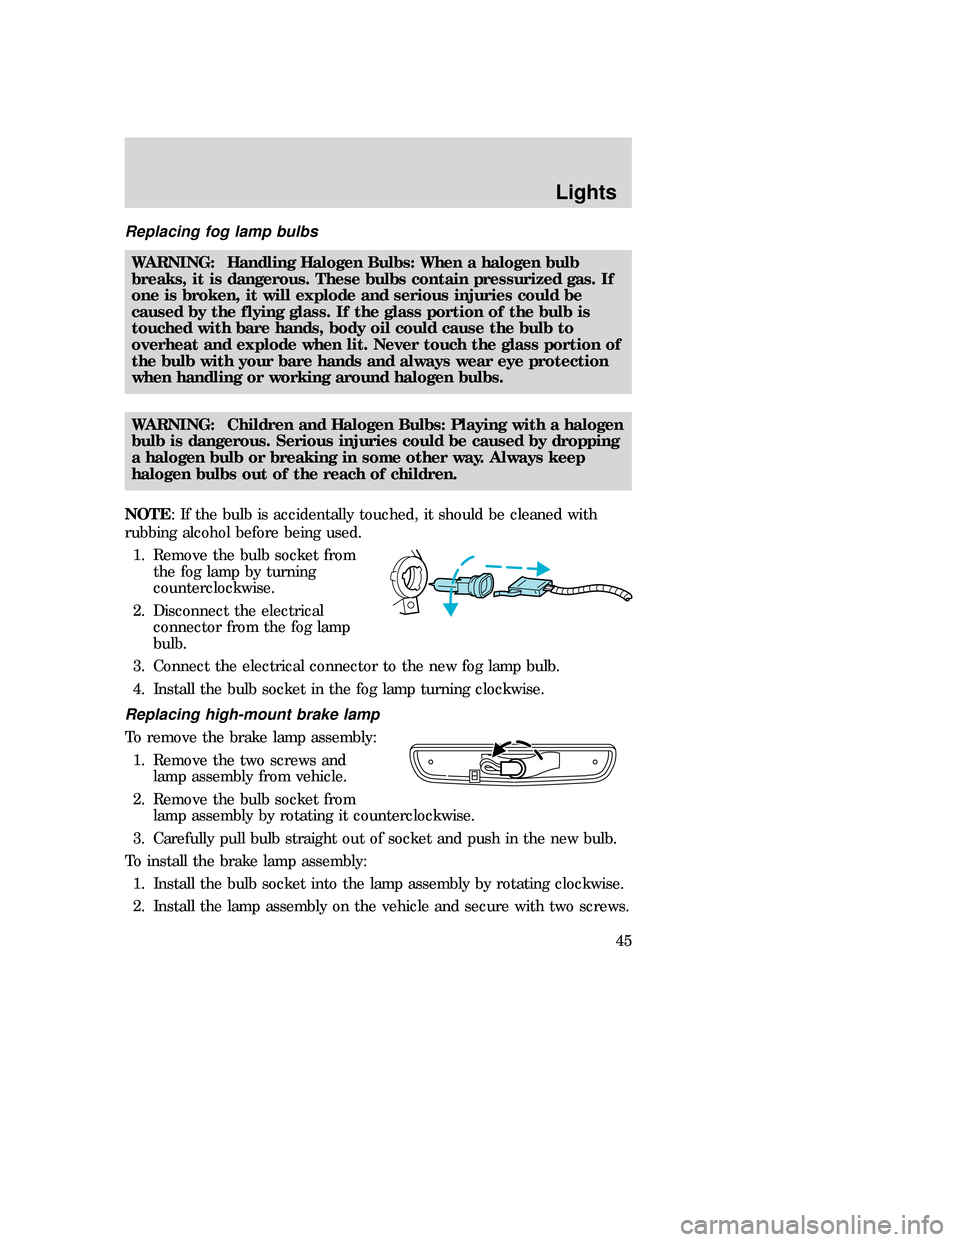 MAZDA MODEL B-SERIES 2006  Owners Manual (in English) Replacing fog lamp bulbs
WARNING: Handling Halogen Bulbs: When a halogen bulb
breaks, it is dangerous. These bulbs contain pressurized gas. If
one is broken, it will explode and serious injuries could